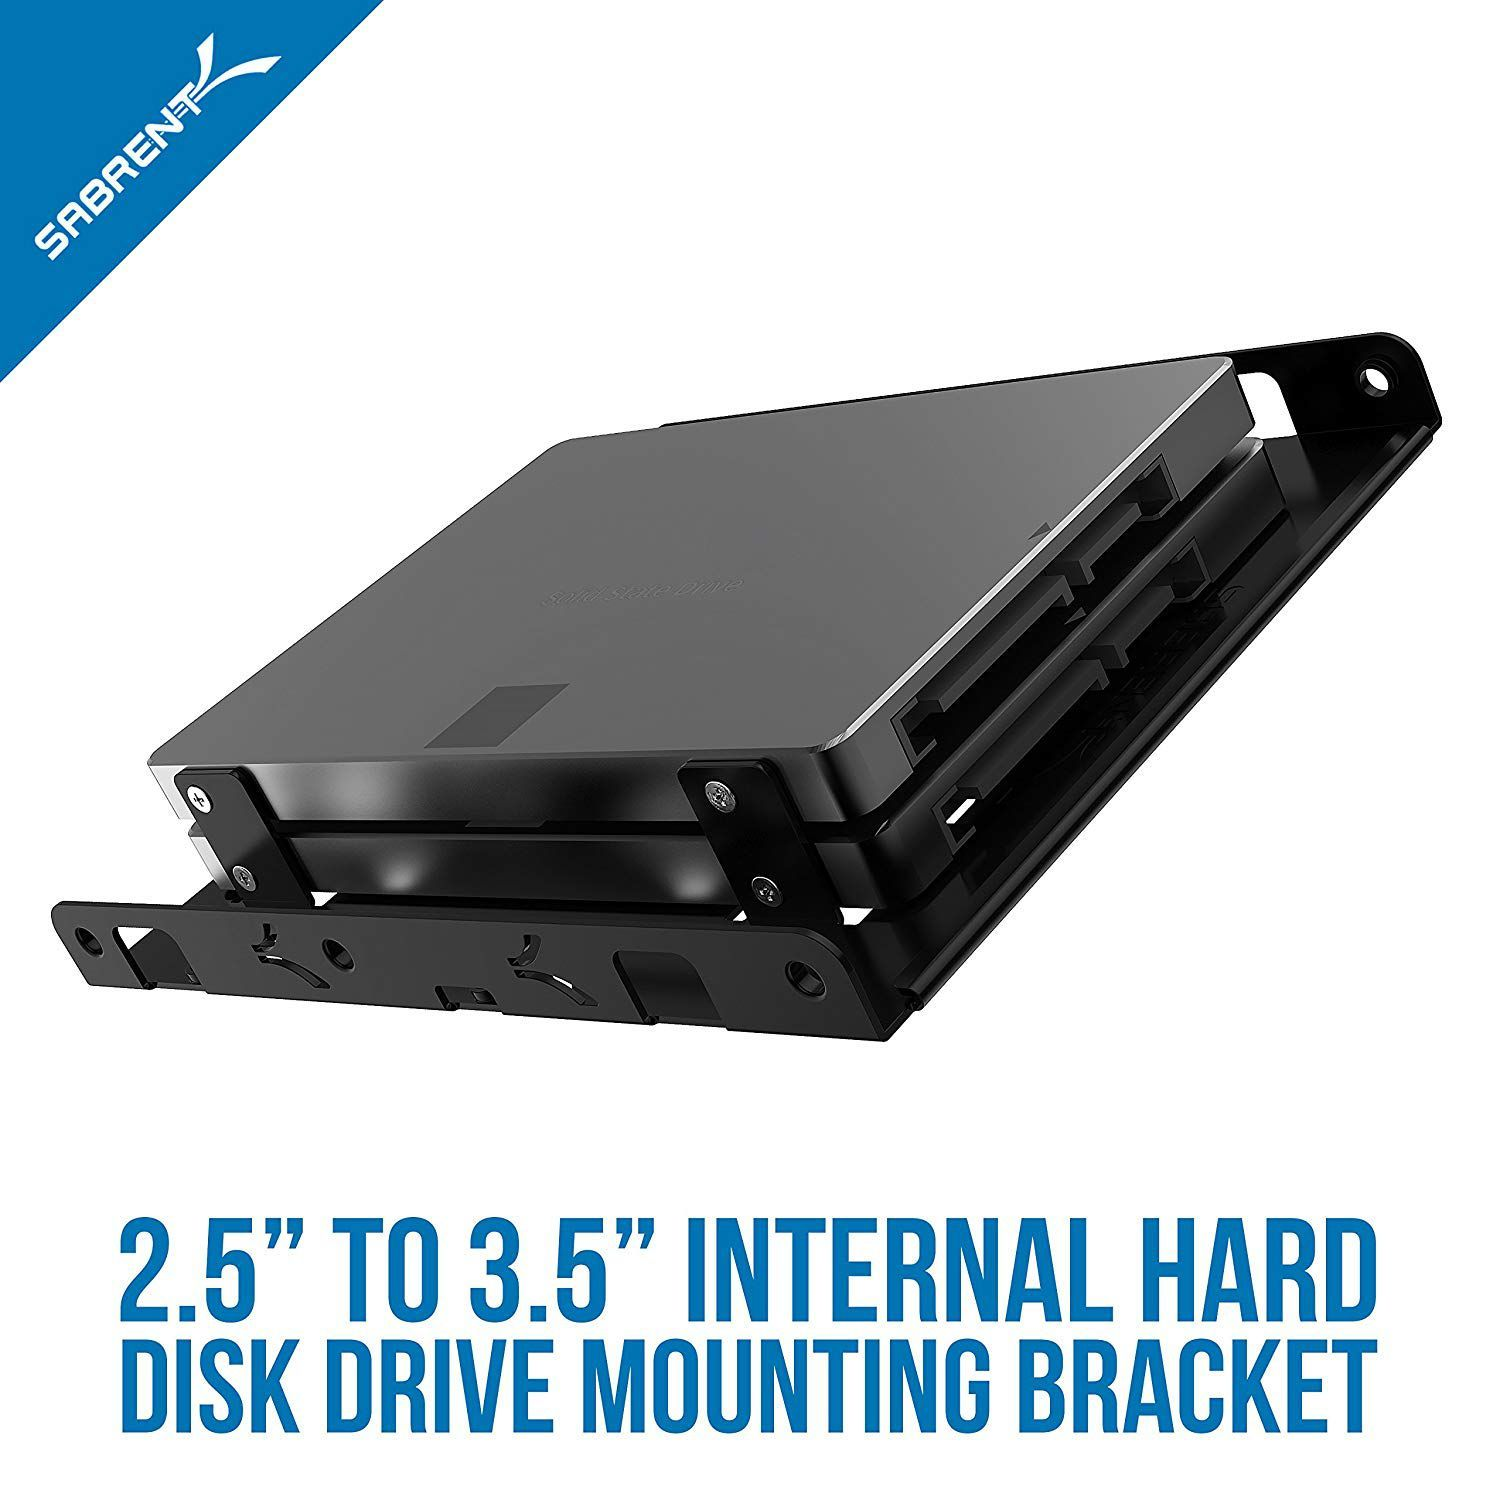 SABRENT 3.5 Inch to x2 SSD / 2.5 Inch Internal Hard Drive Mounting Kit [SATA and Power Cables Included] (BK-HDCC)